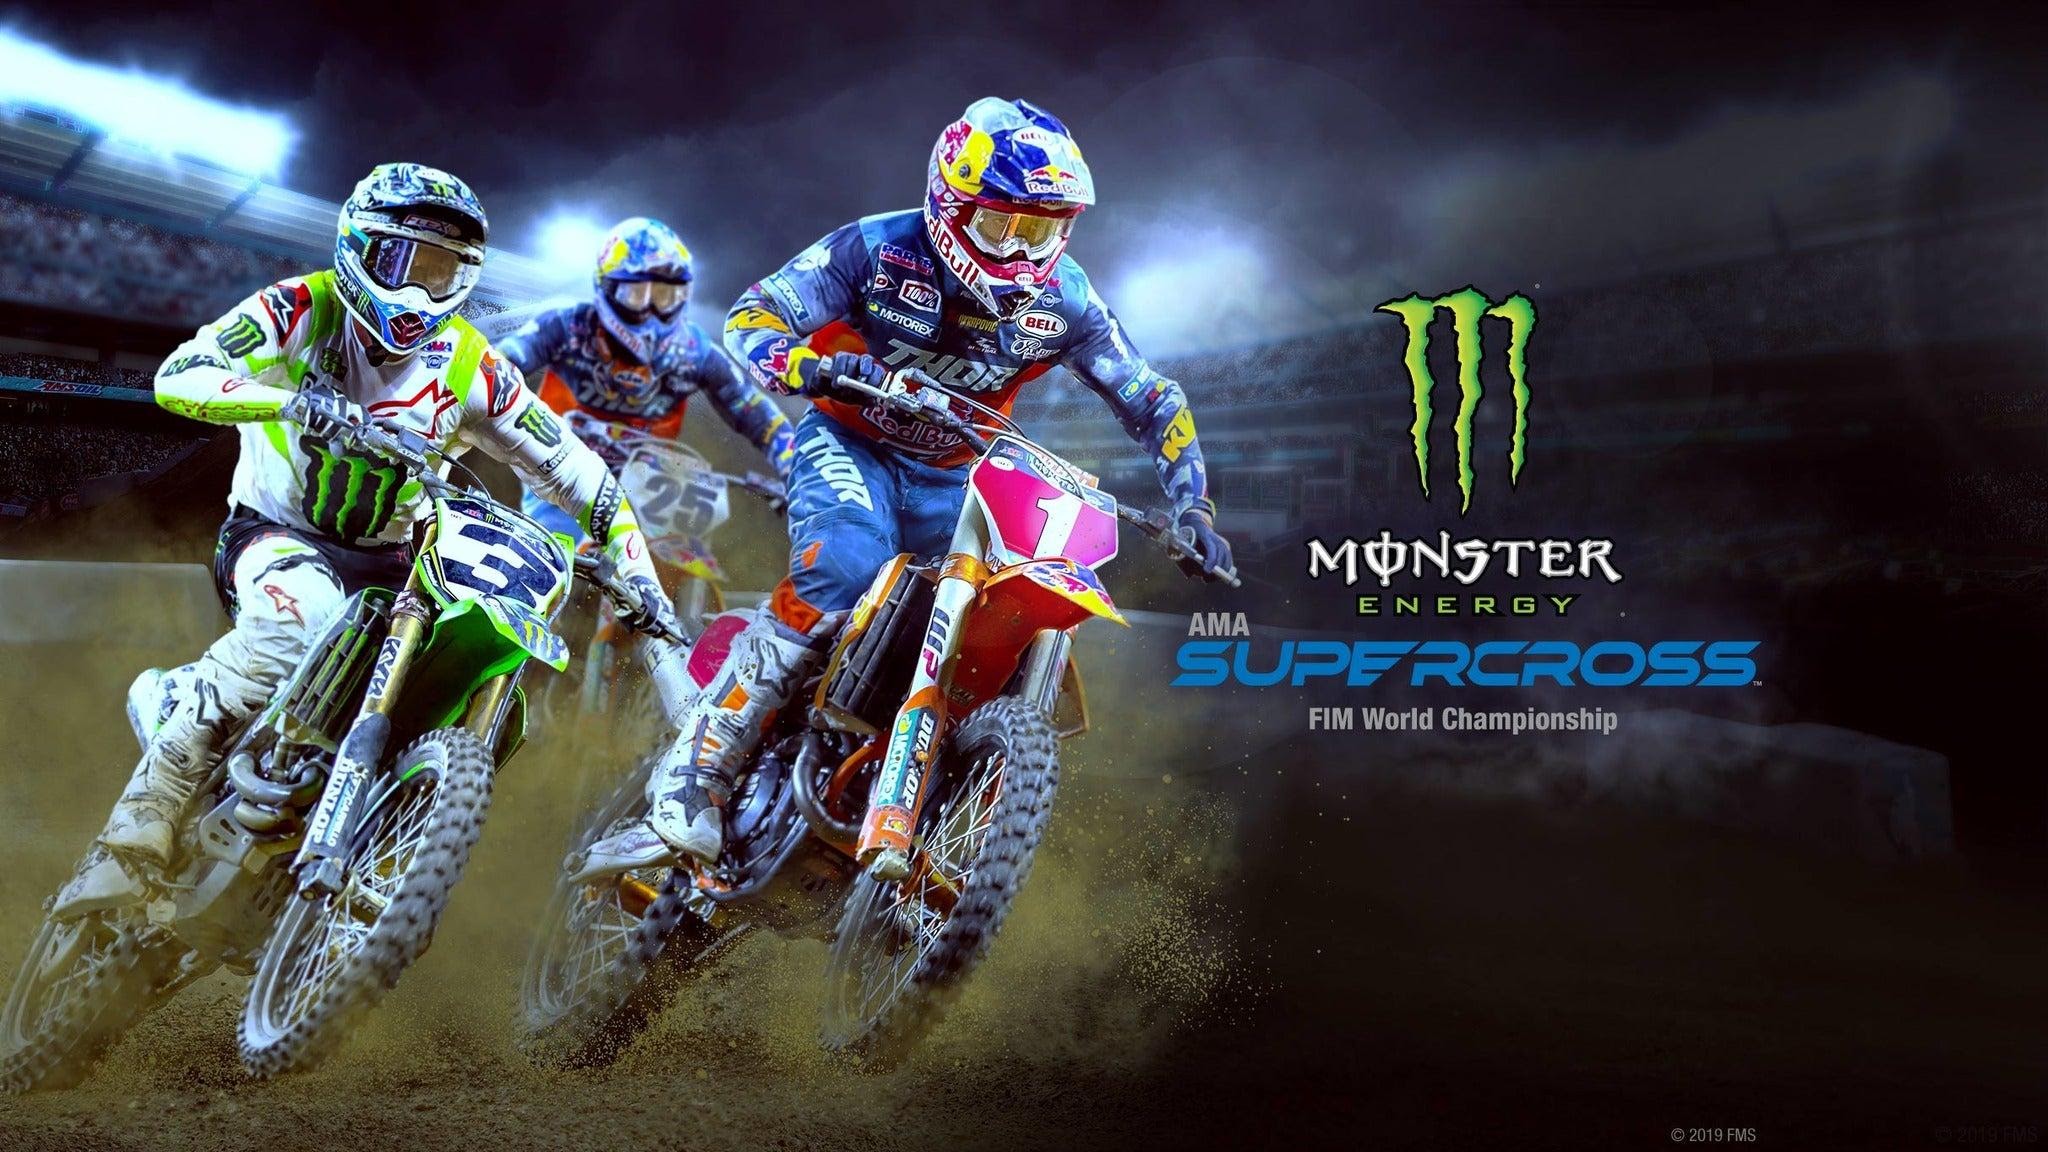 Facebook Friday Freebie Win 5 Tickets To Monster Energy Supercross 